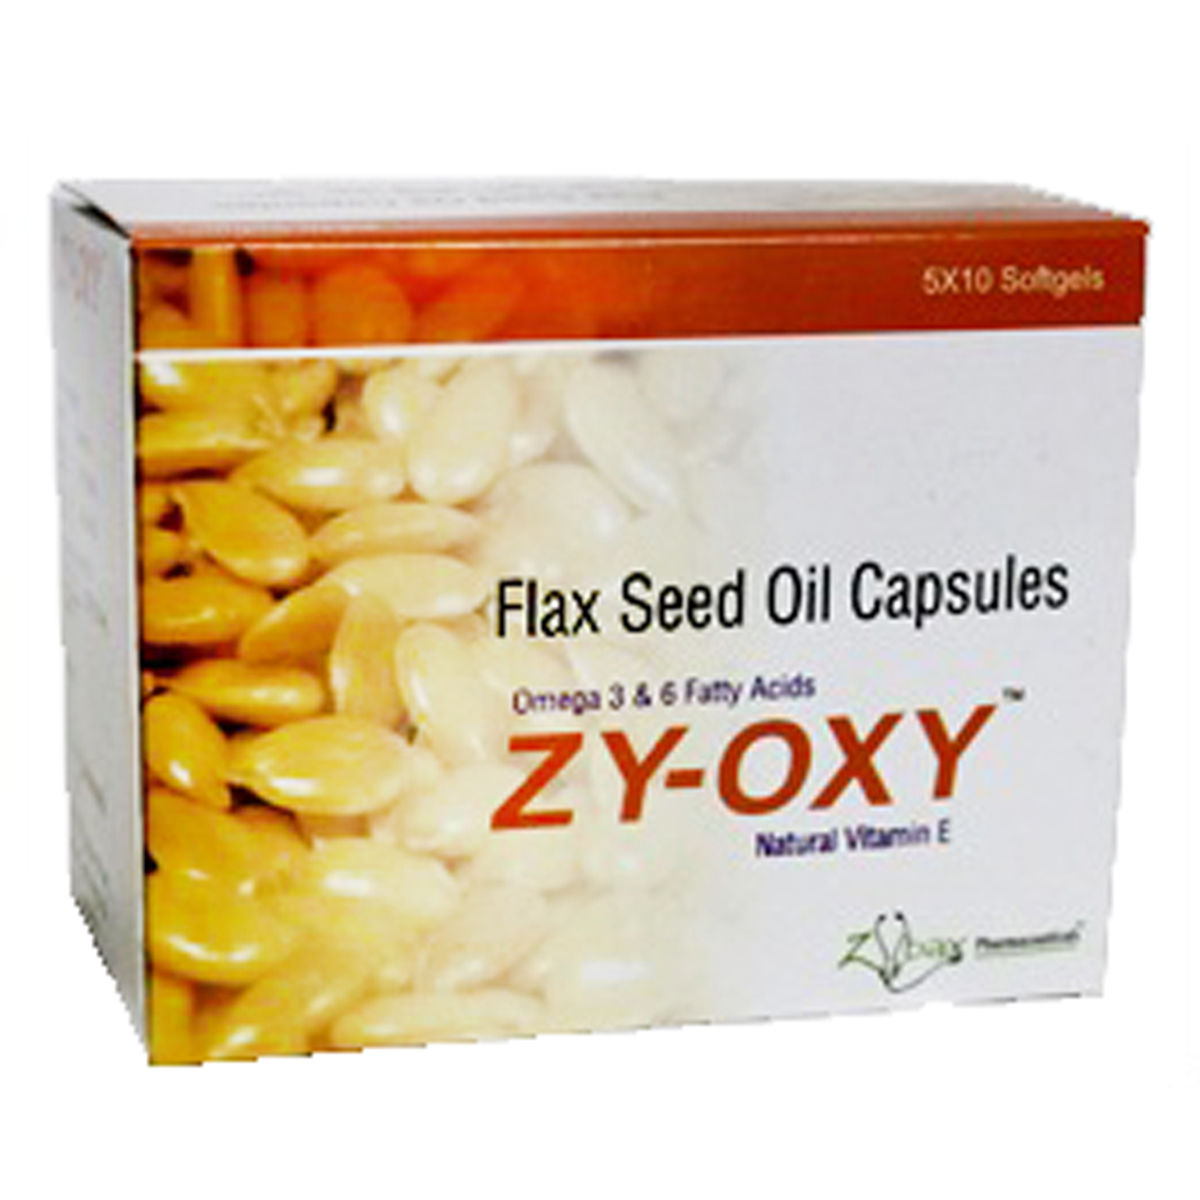 Buy Zy-Oxy, 10 Capsules Online